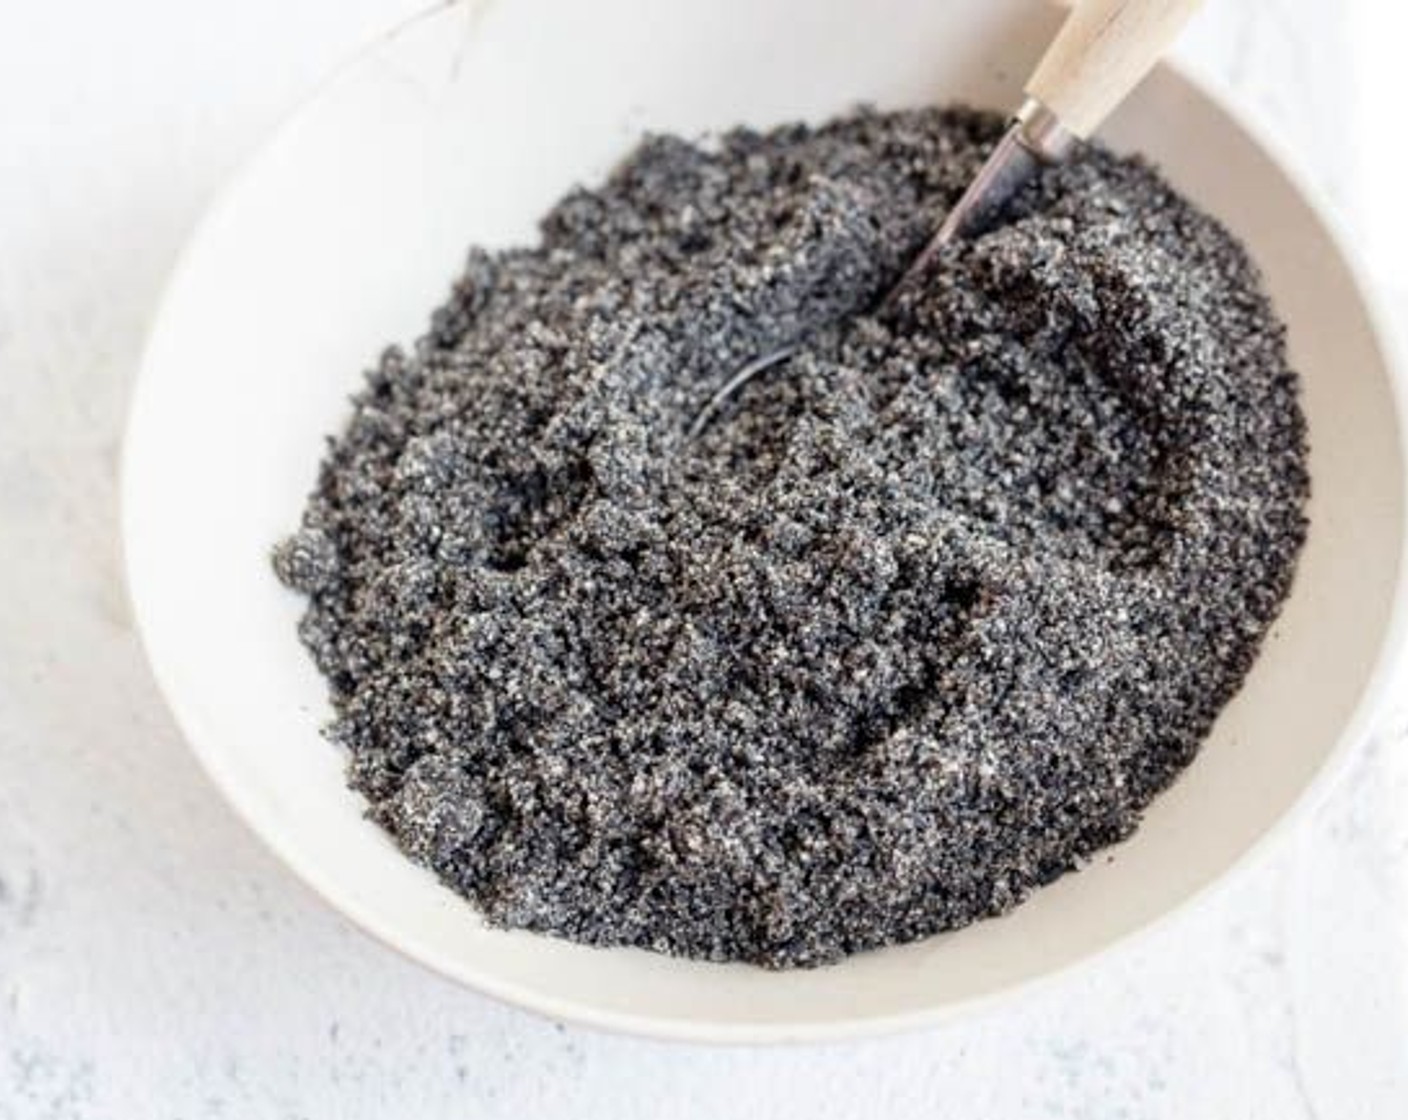 step 1 Toast Black Sesame Seeds (1 cup) in a pan or oven and then ground them into powder. Smaller particles can be accepted for the filling.